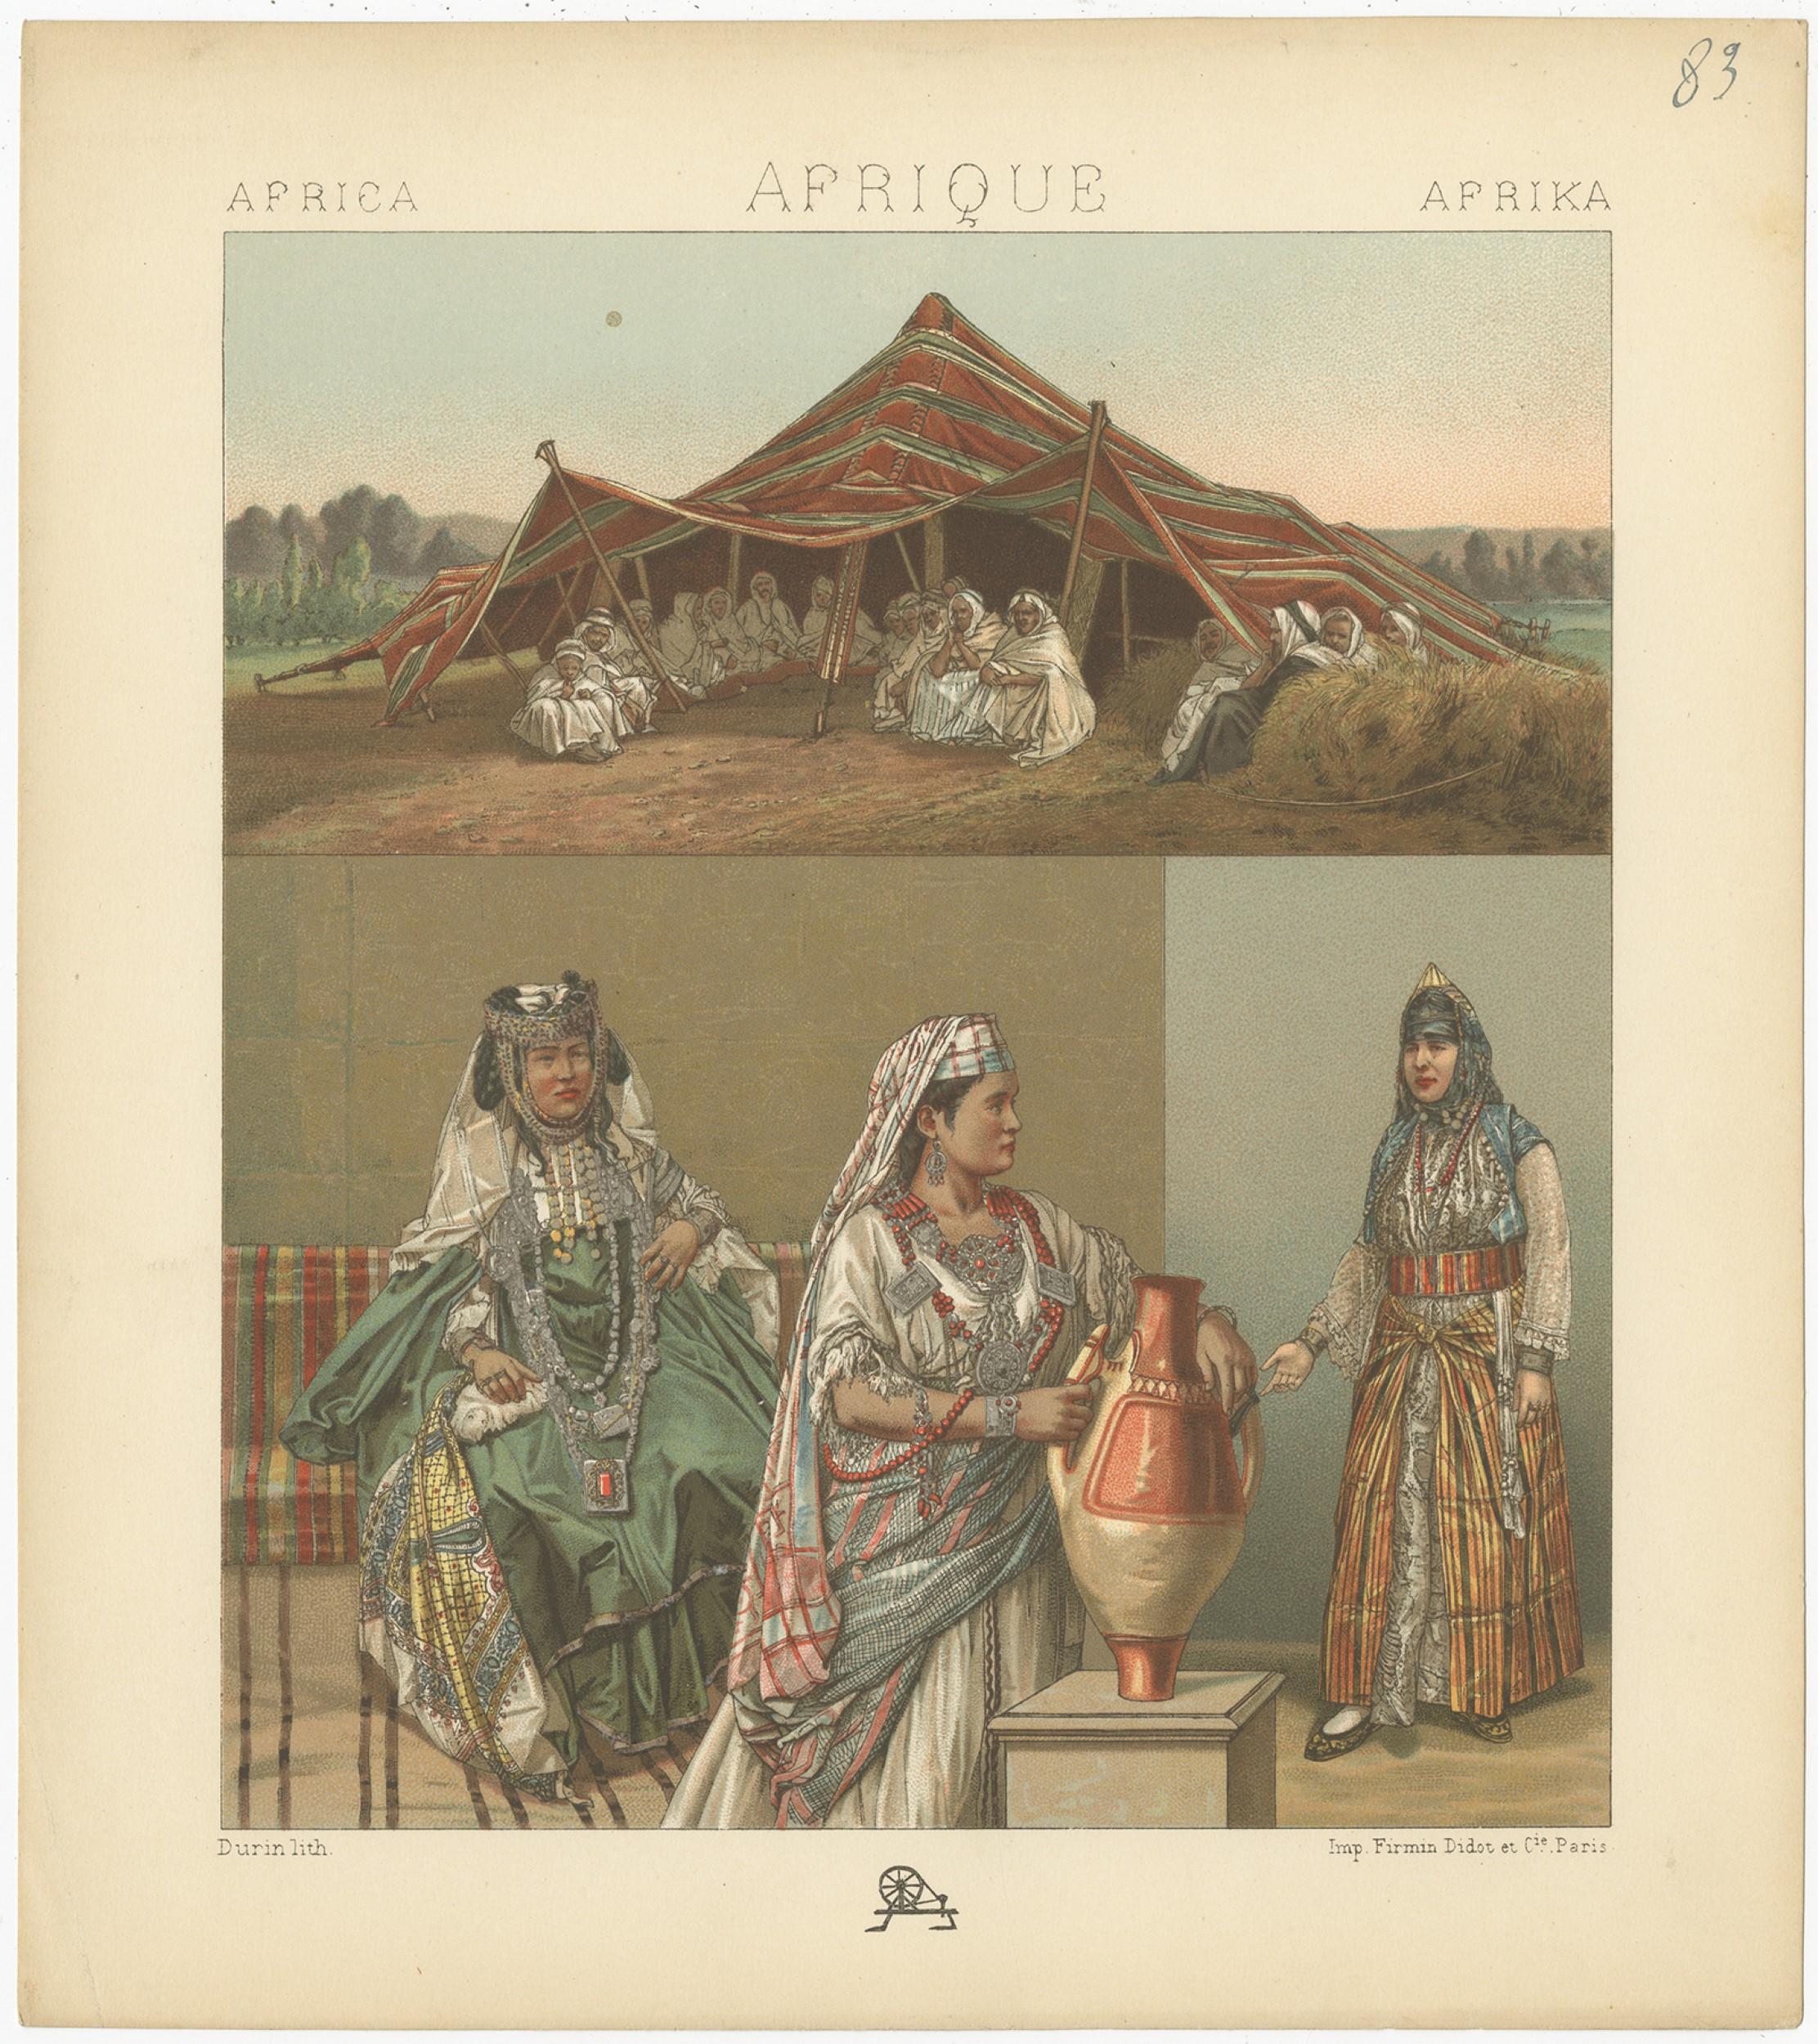 Antique print titled 'Africa - Afrique - Afrika'. Chromolithograph of African encampments. This print originates from 'Le Costume Historique' by M.A. Racinet. Published, circa 1880.